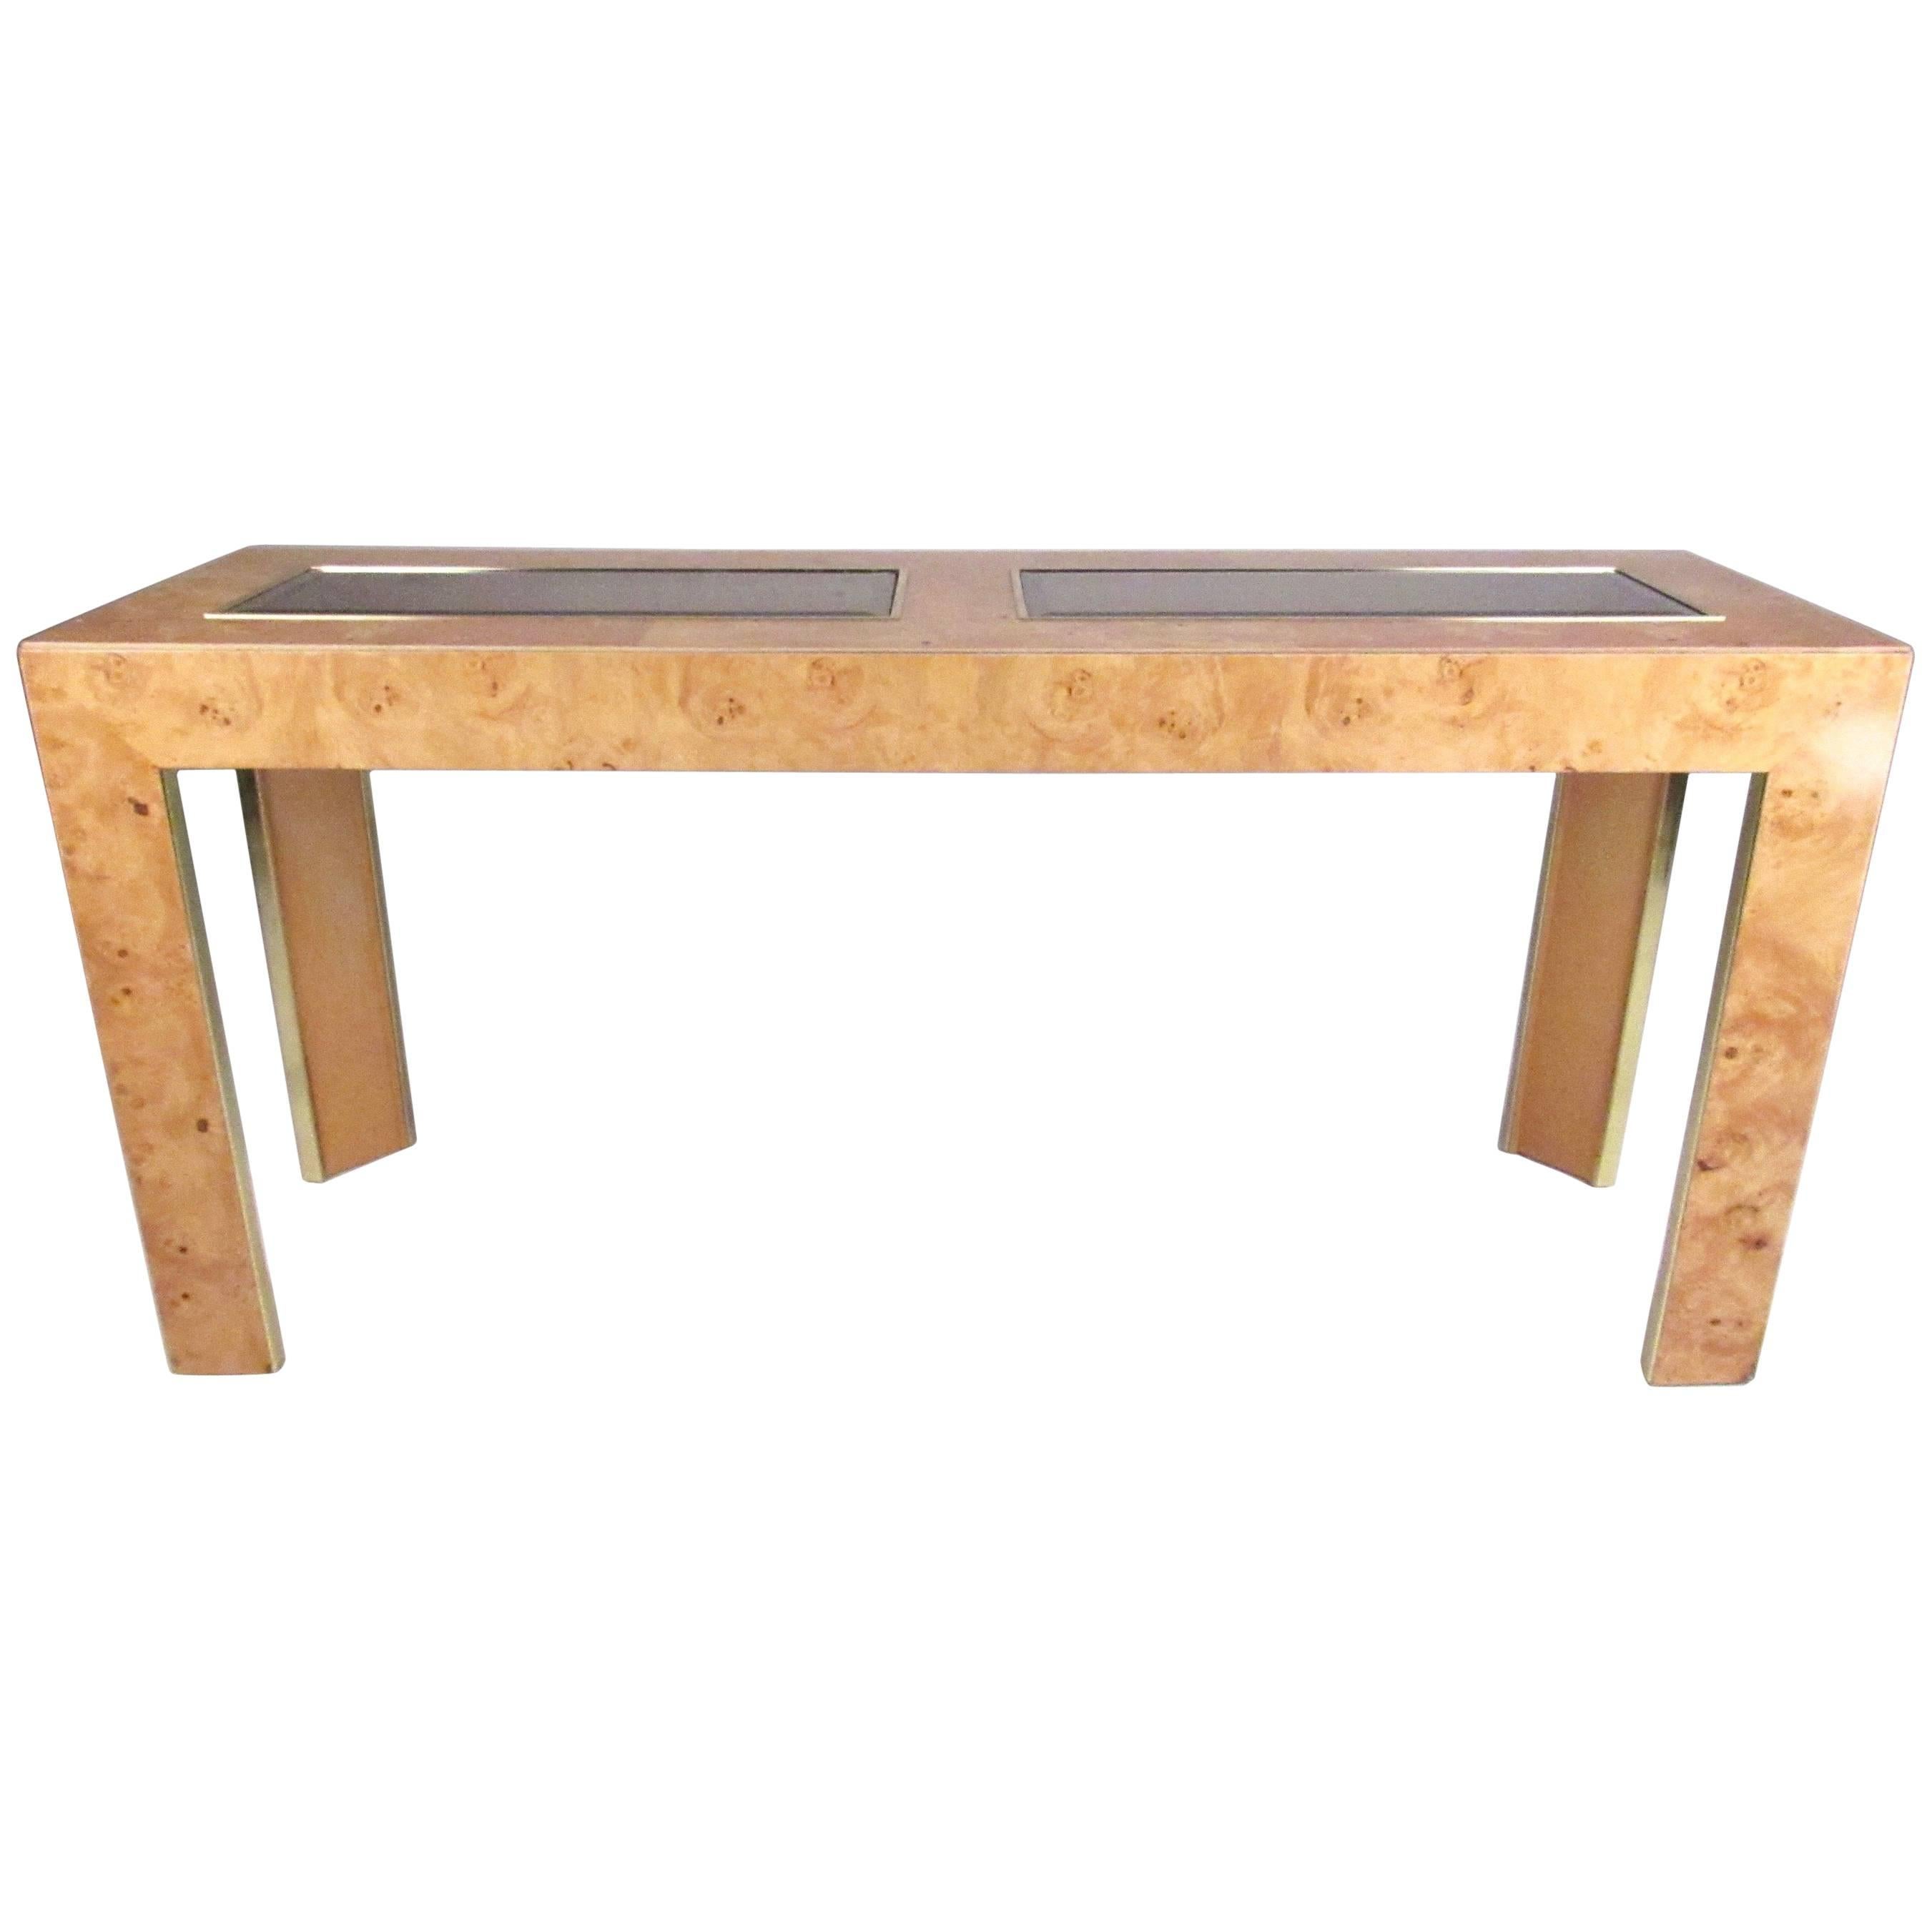 This stylish vintage modern console features maple burl wood finish and two pieces of smoked glass inlaid. Brass finish trim adds to the midcentury appeal of this vintage American table, making it the perfect addition to entryway, hall, or office.